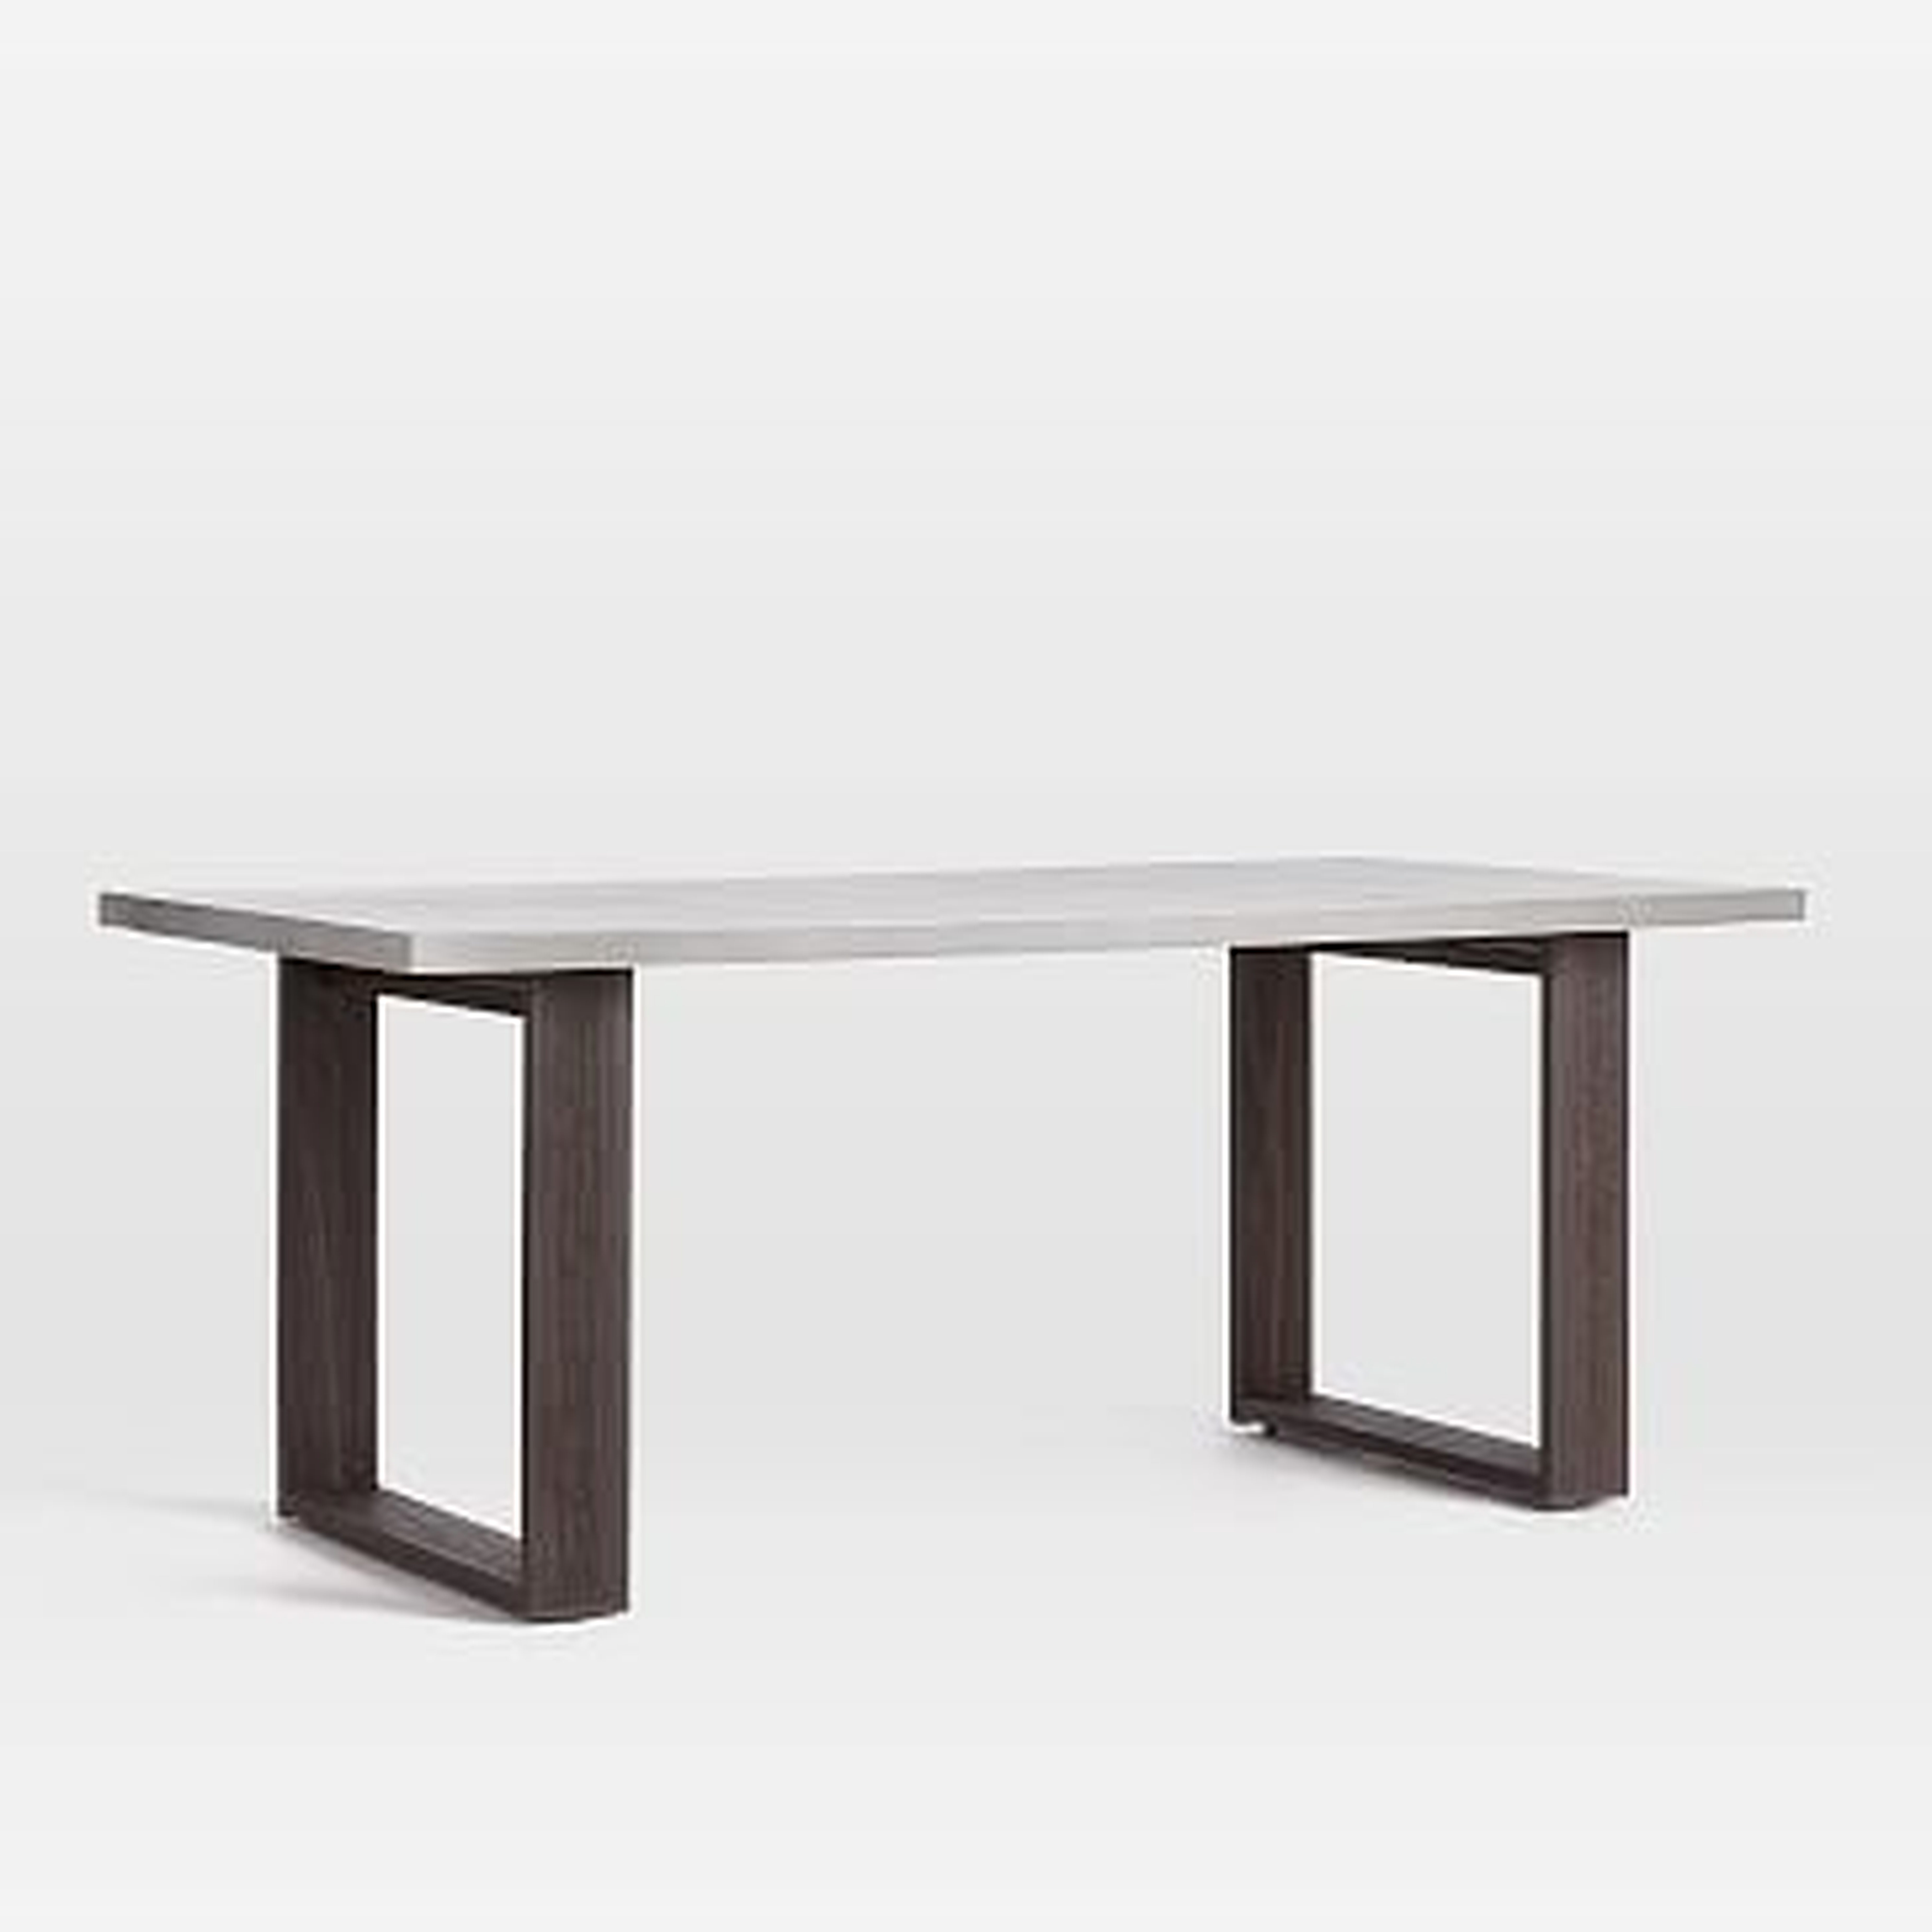 Concrete Outdoor Dining Table, Weathered Cafe - West Elm